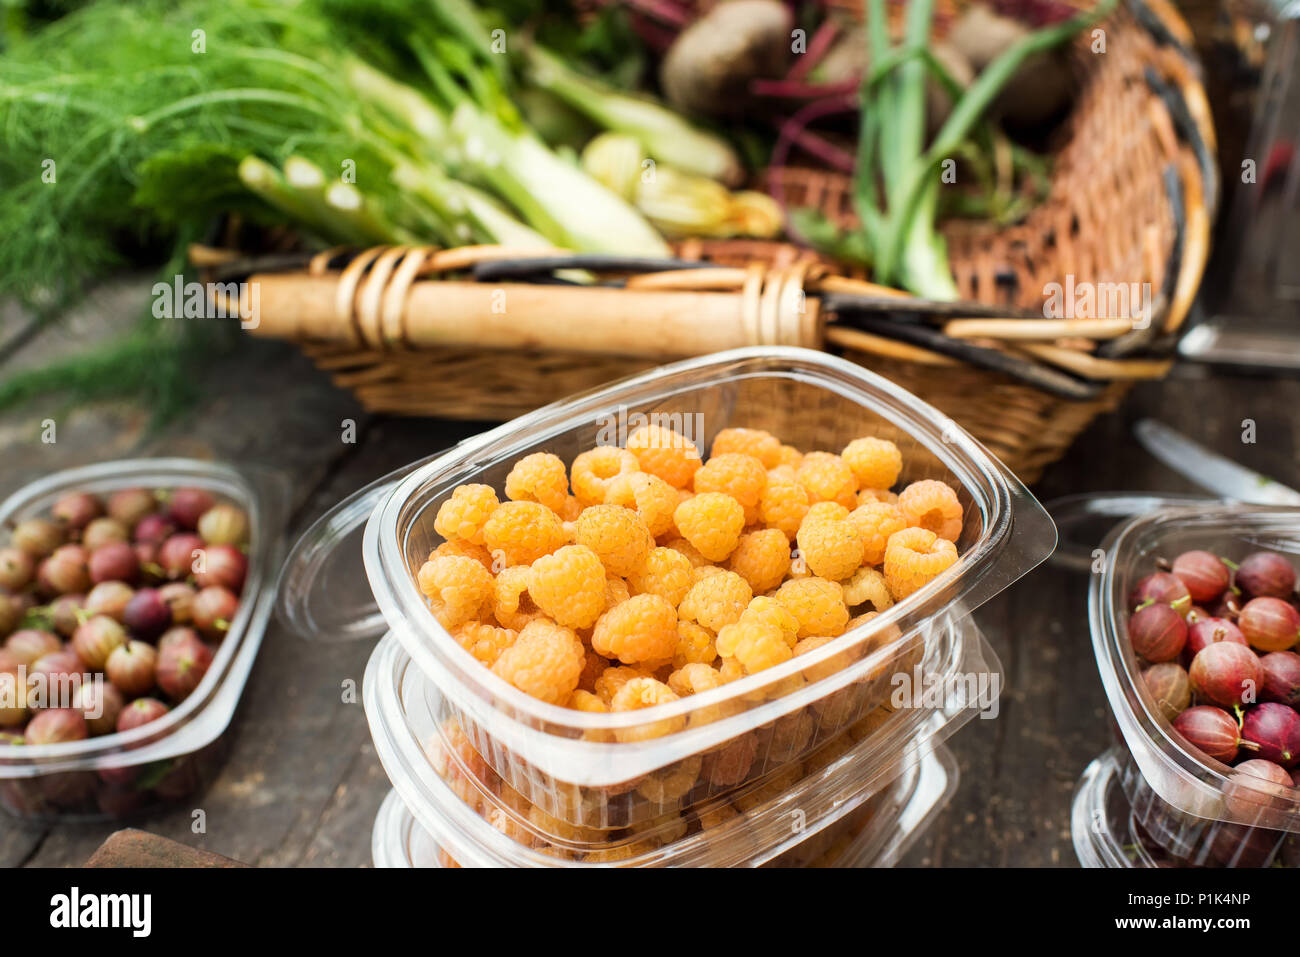 Yellow raspberries on farmer table in a market gardening concept Stock Photo